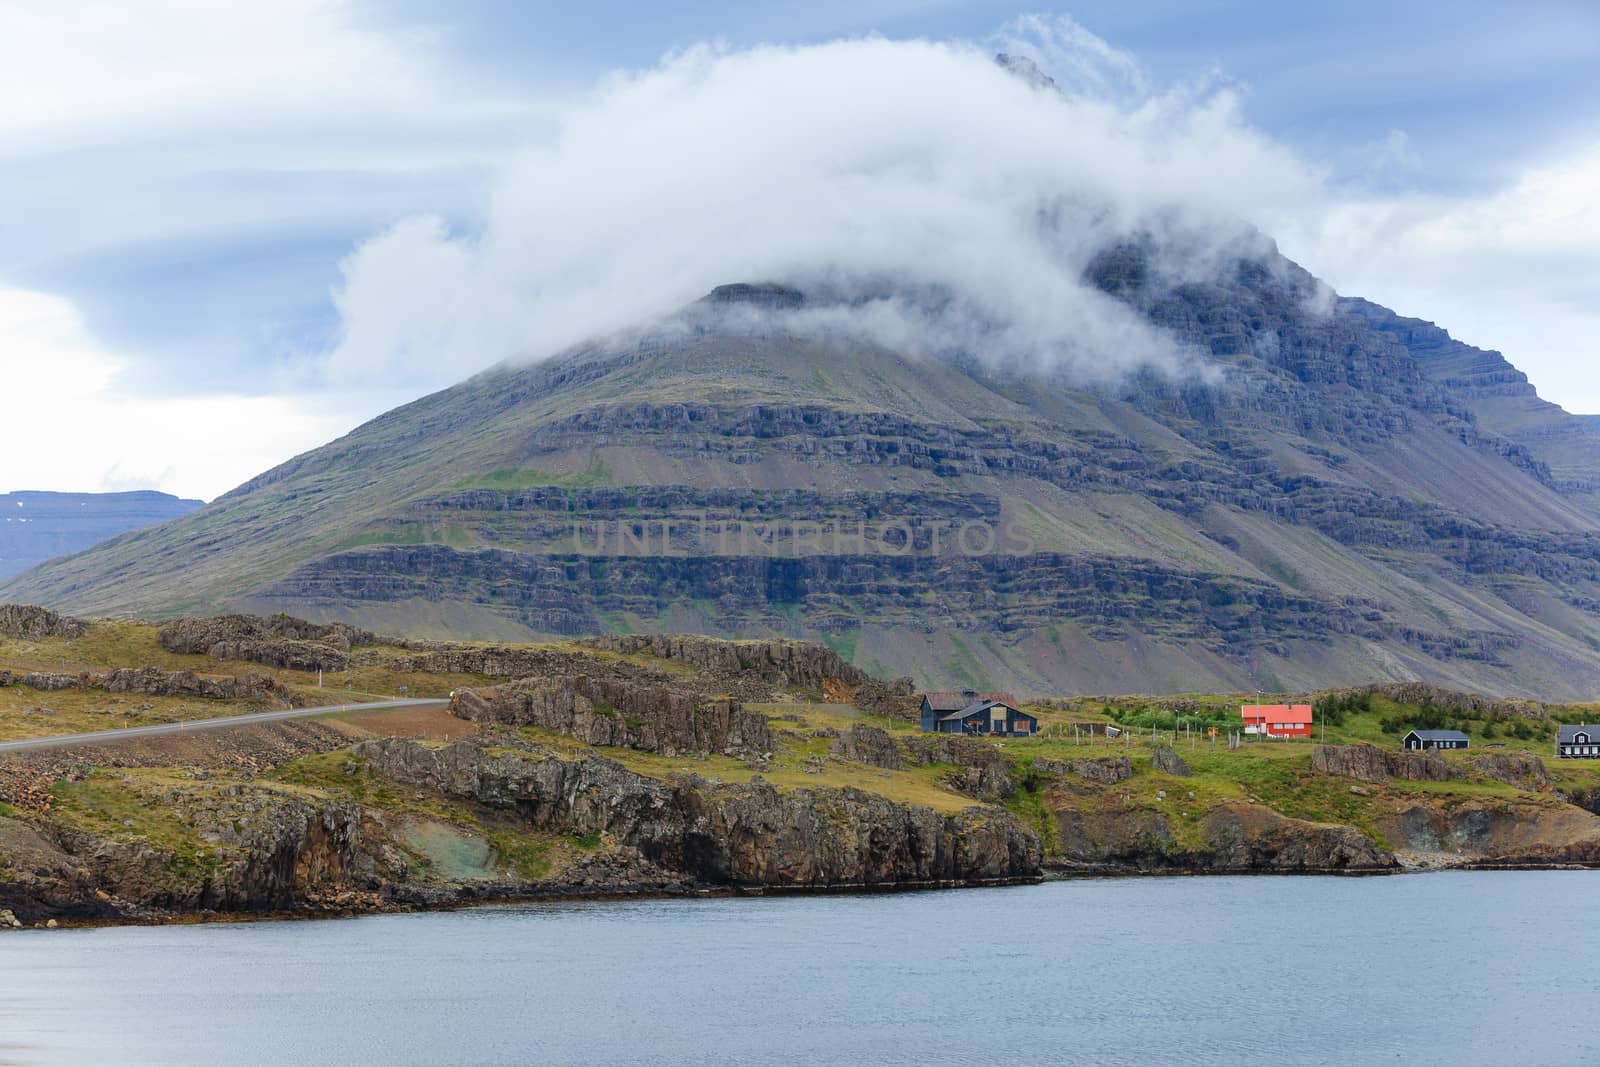 Cloudy sky over the coast in the East Fjords Iceland.